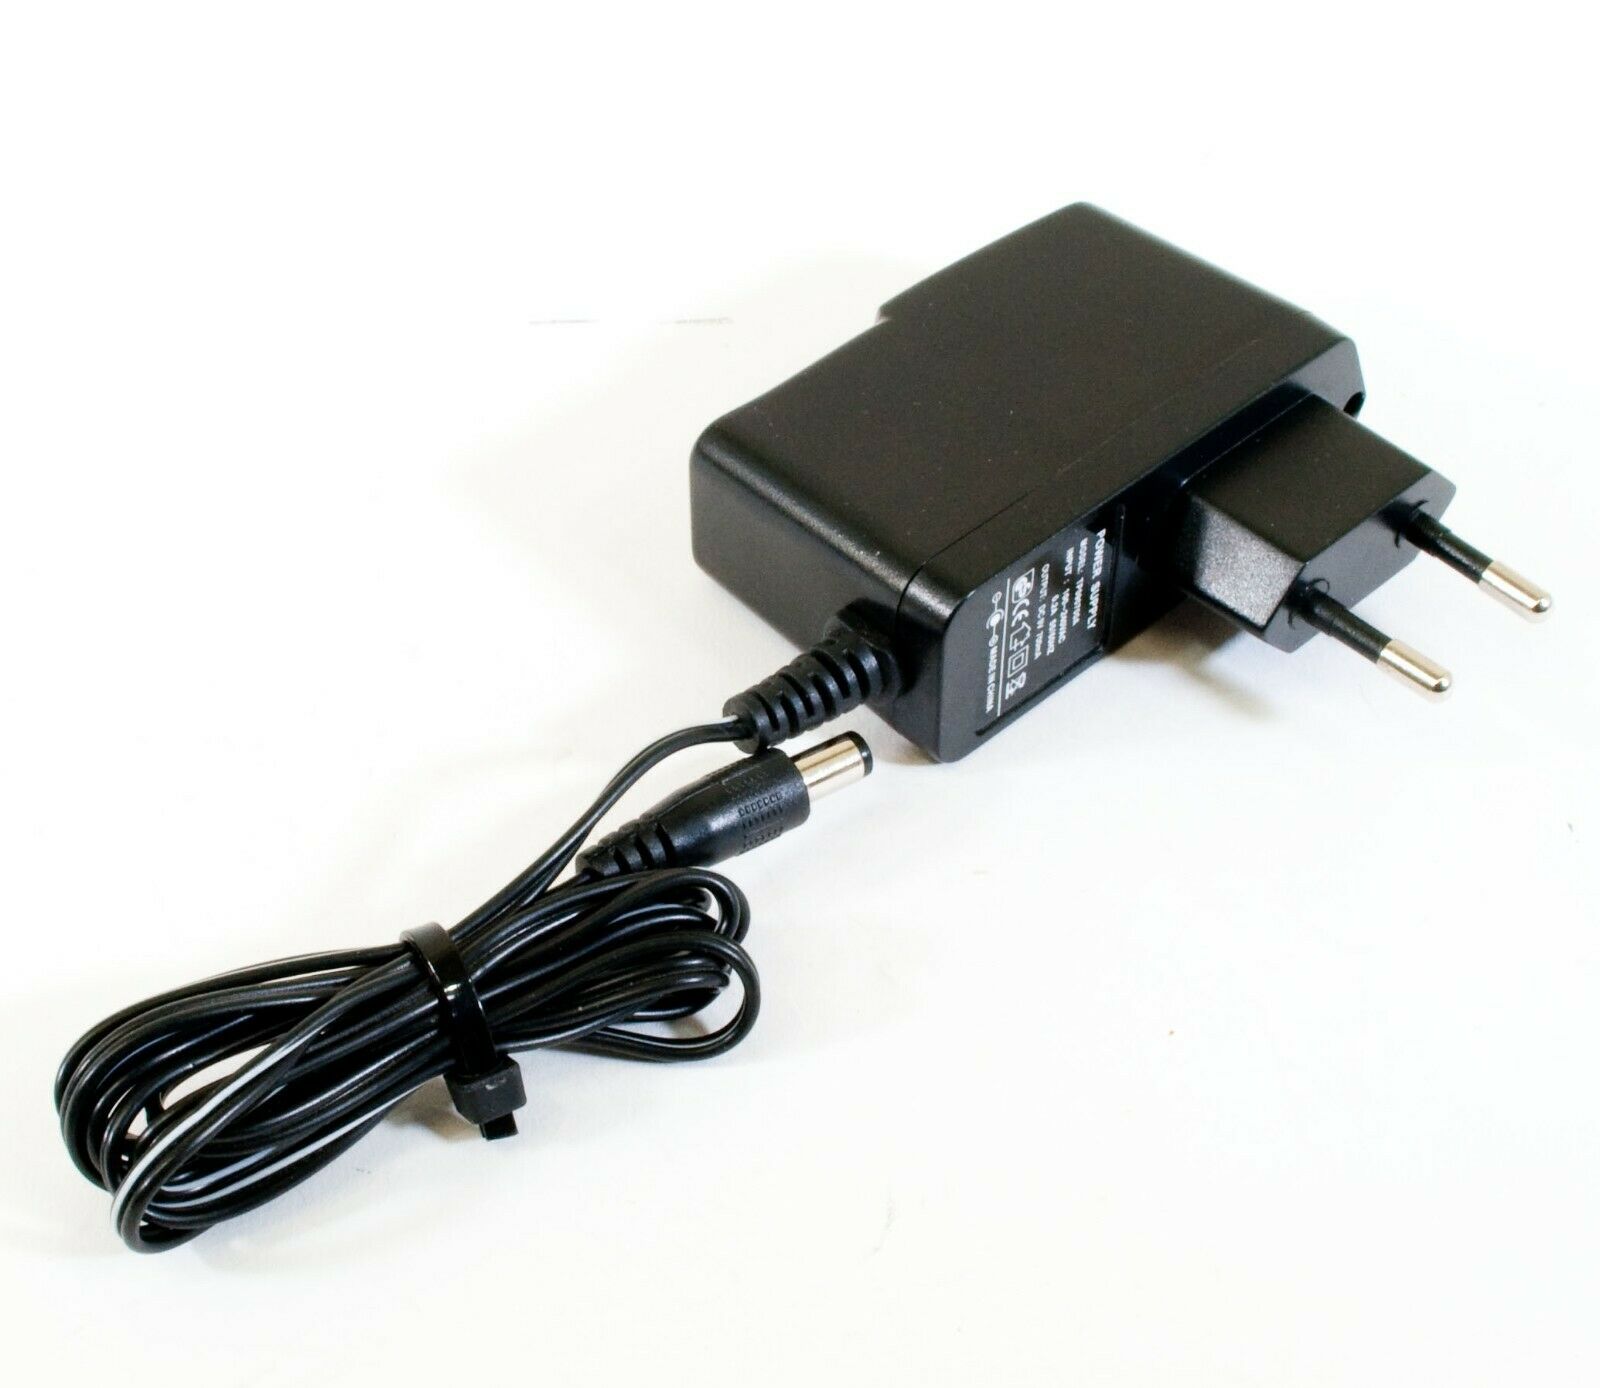 GS TP090700A AC Adapter 9V 700mA Original Charger Power Supply Output Current: 700 mA Voltage: 9 - Click Image to Close